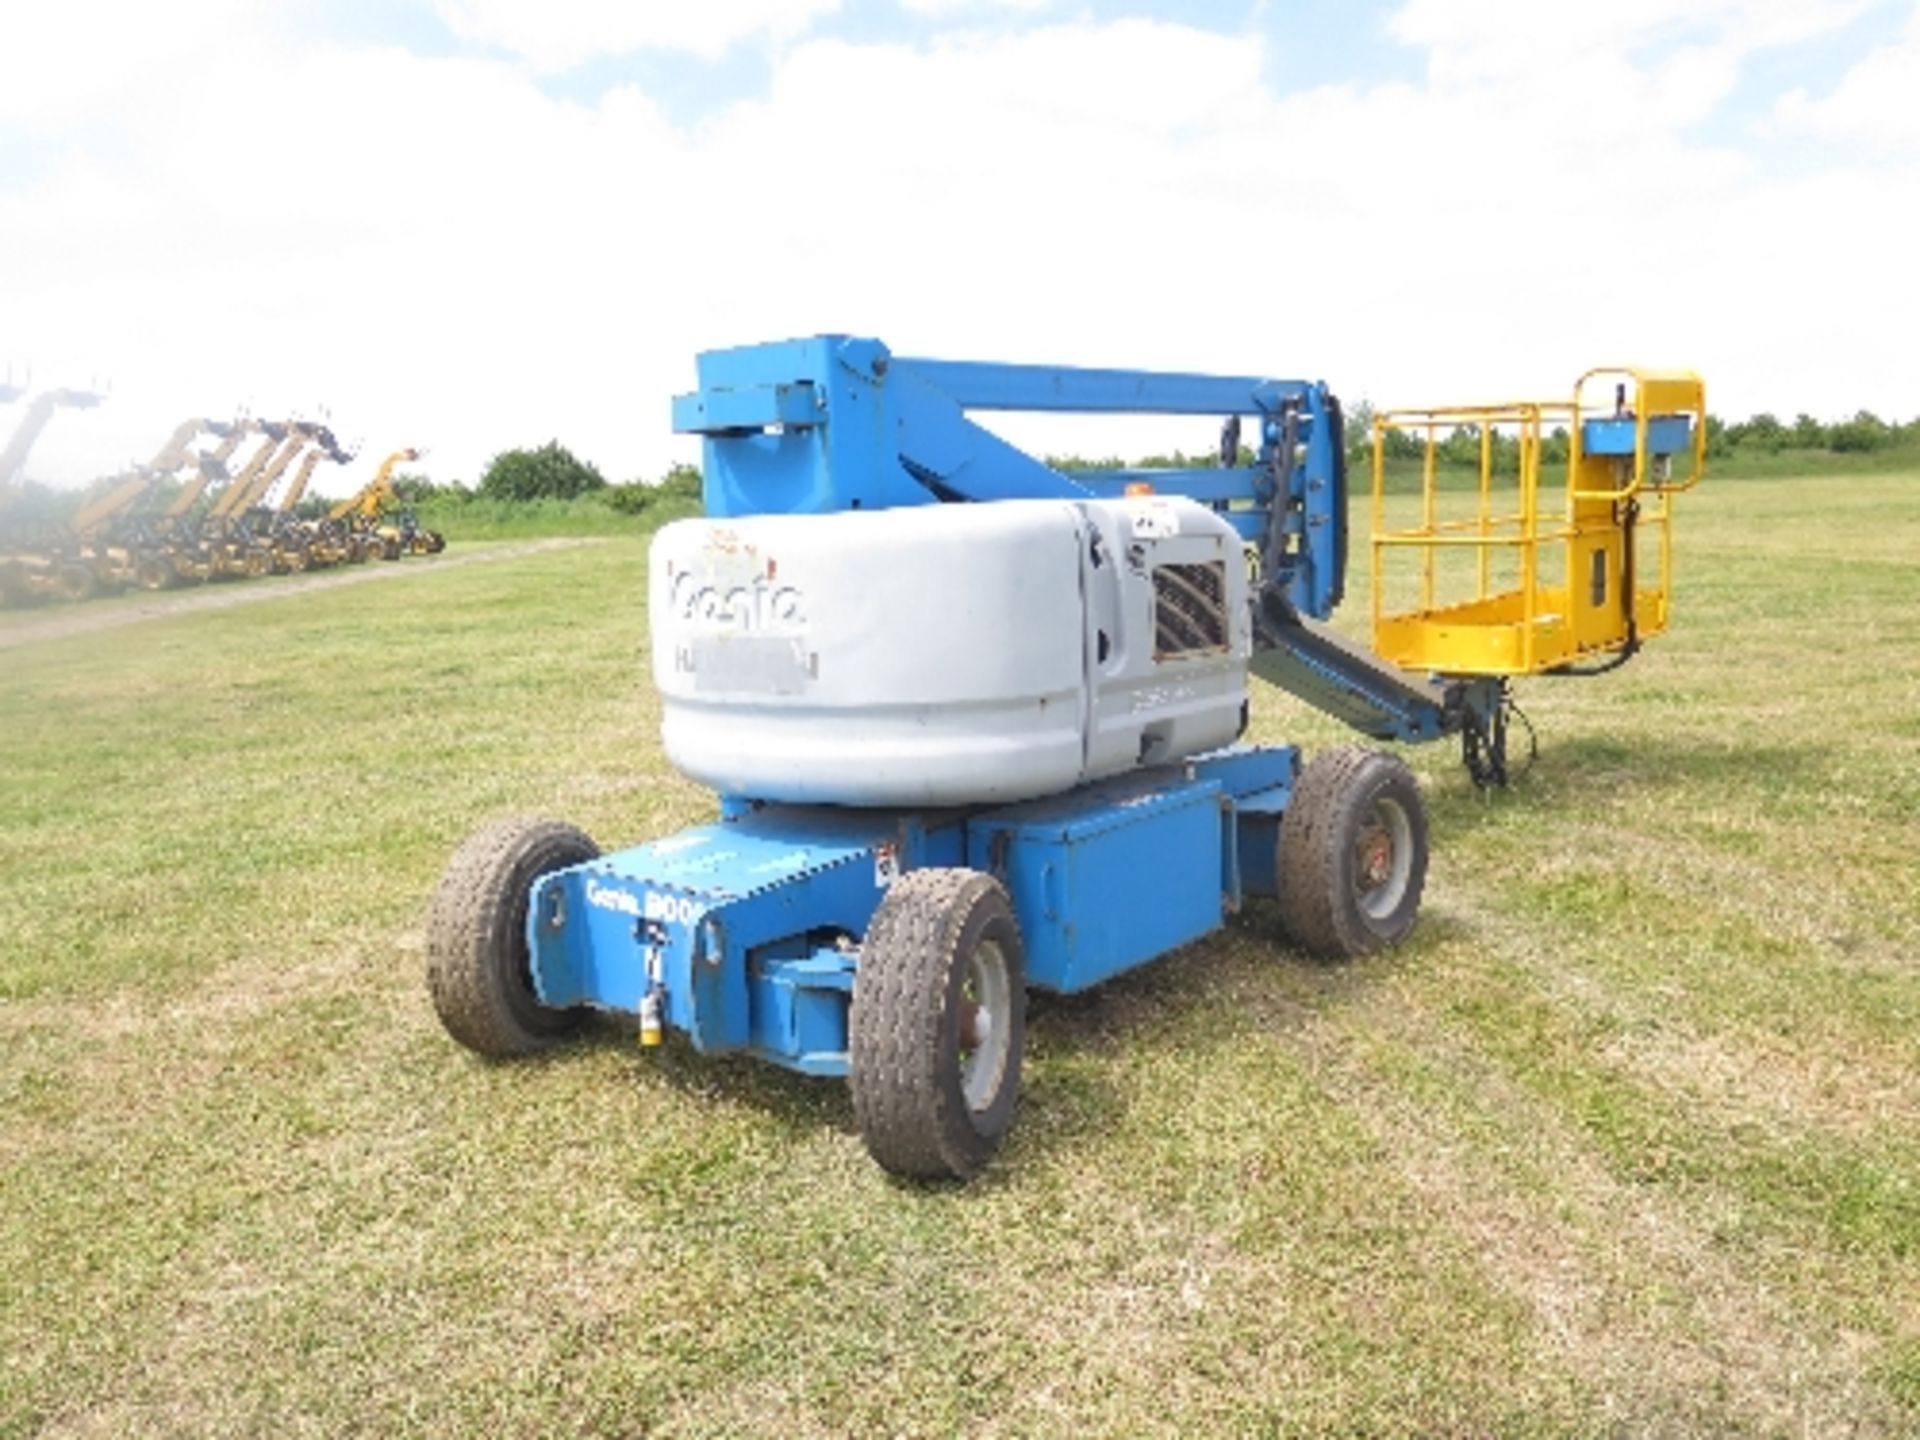 Genie Z45/25 Bi-fuel artic boom boom 898 hrs 2005 139909ALL LOTS are SOLD AS SEEN WITHOUT WARRANTY